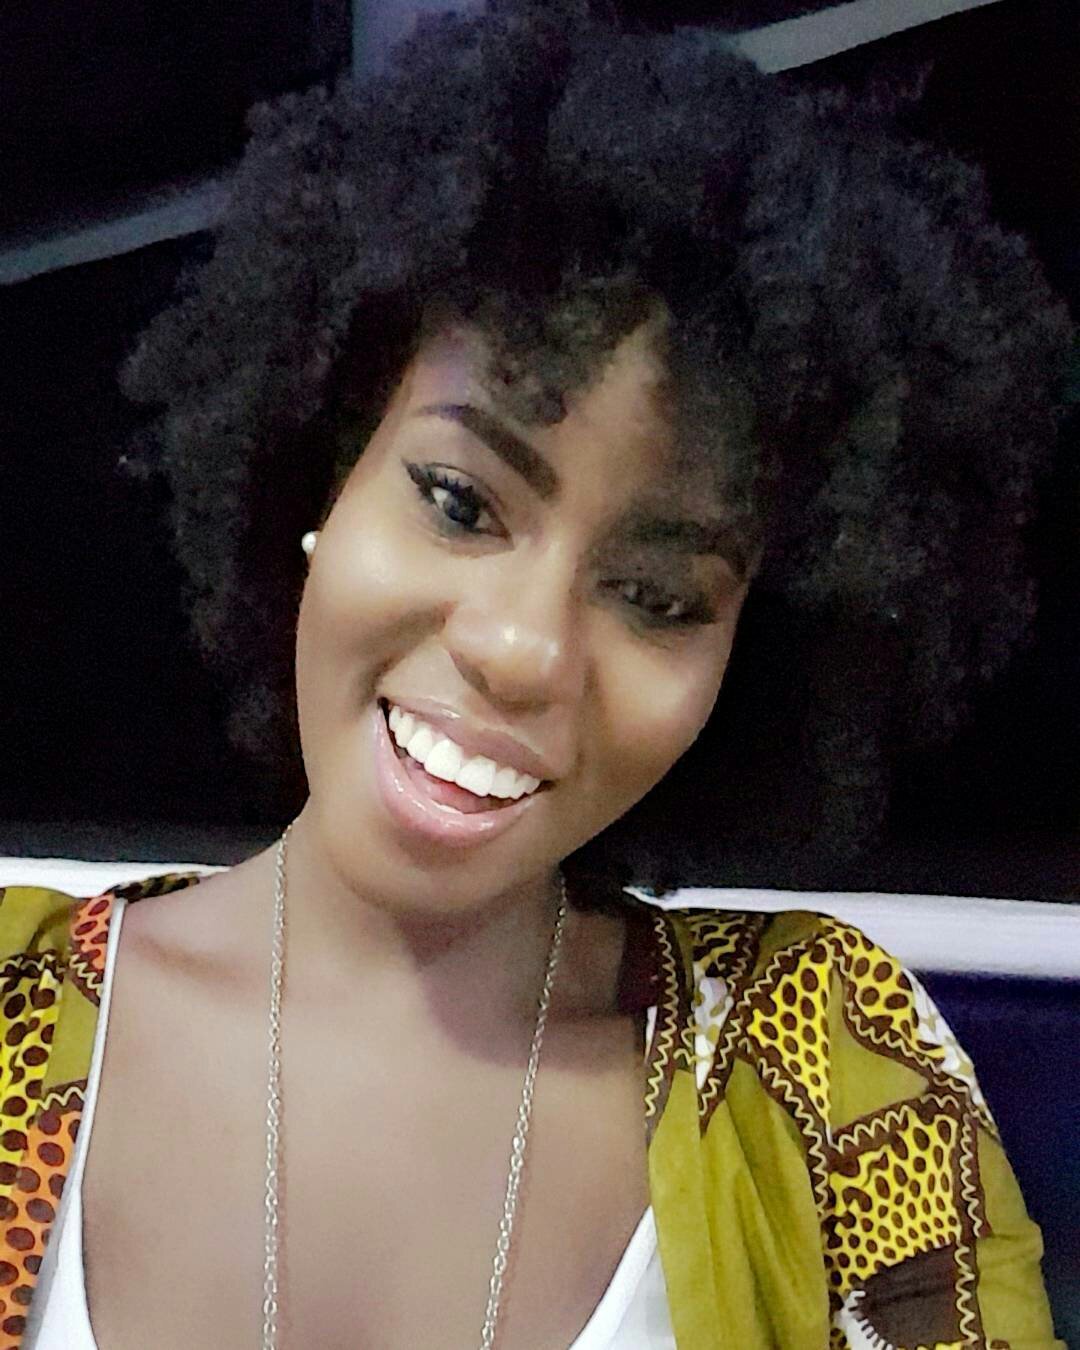 Lower Your Standards To Get A Partner – MzVee Advises Single Ladies